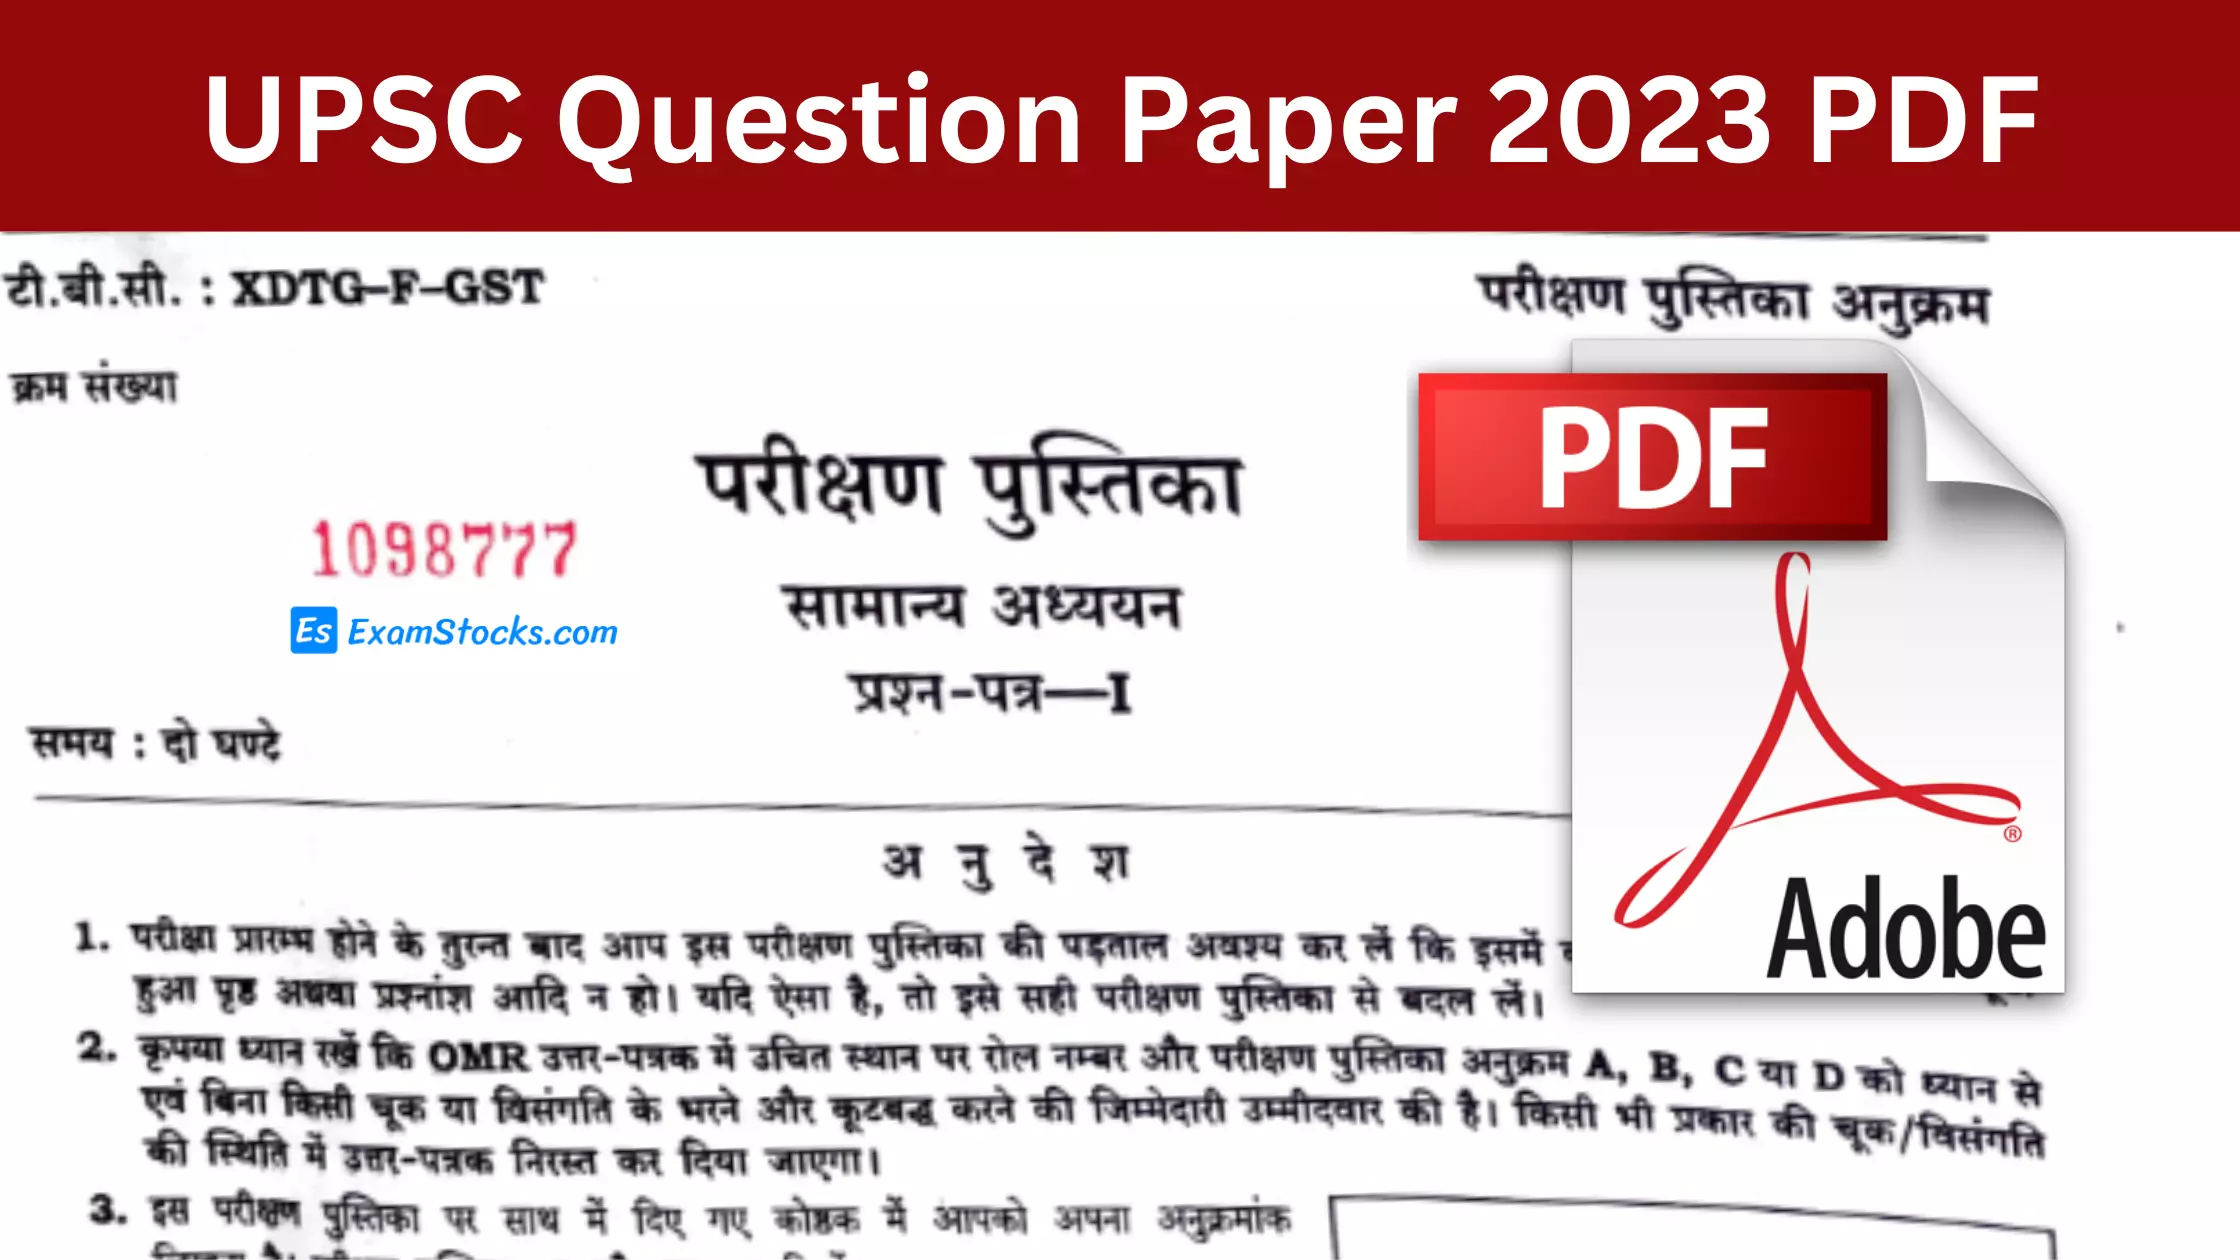 UPSC Question Paper 2023 PDF With Answer Key